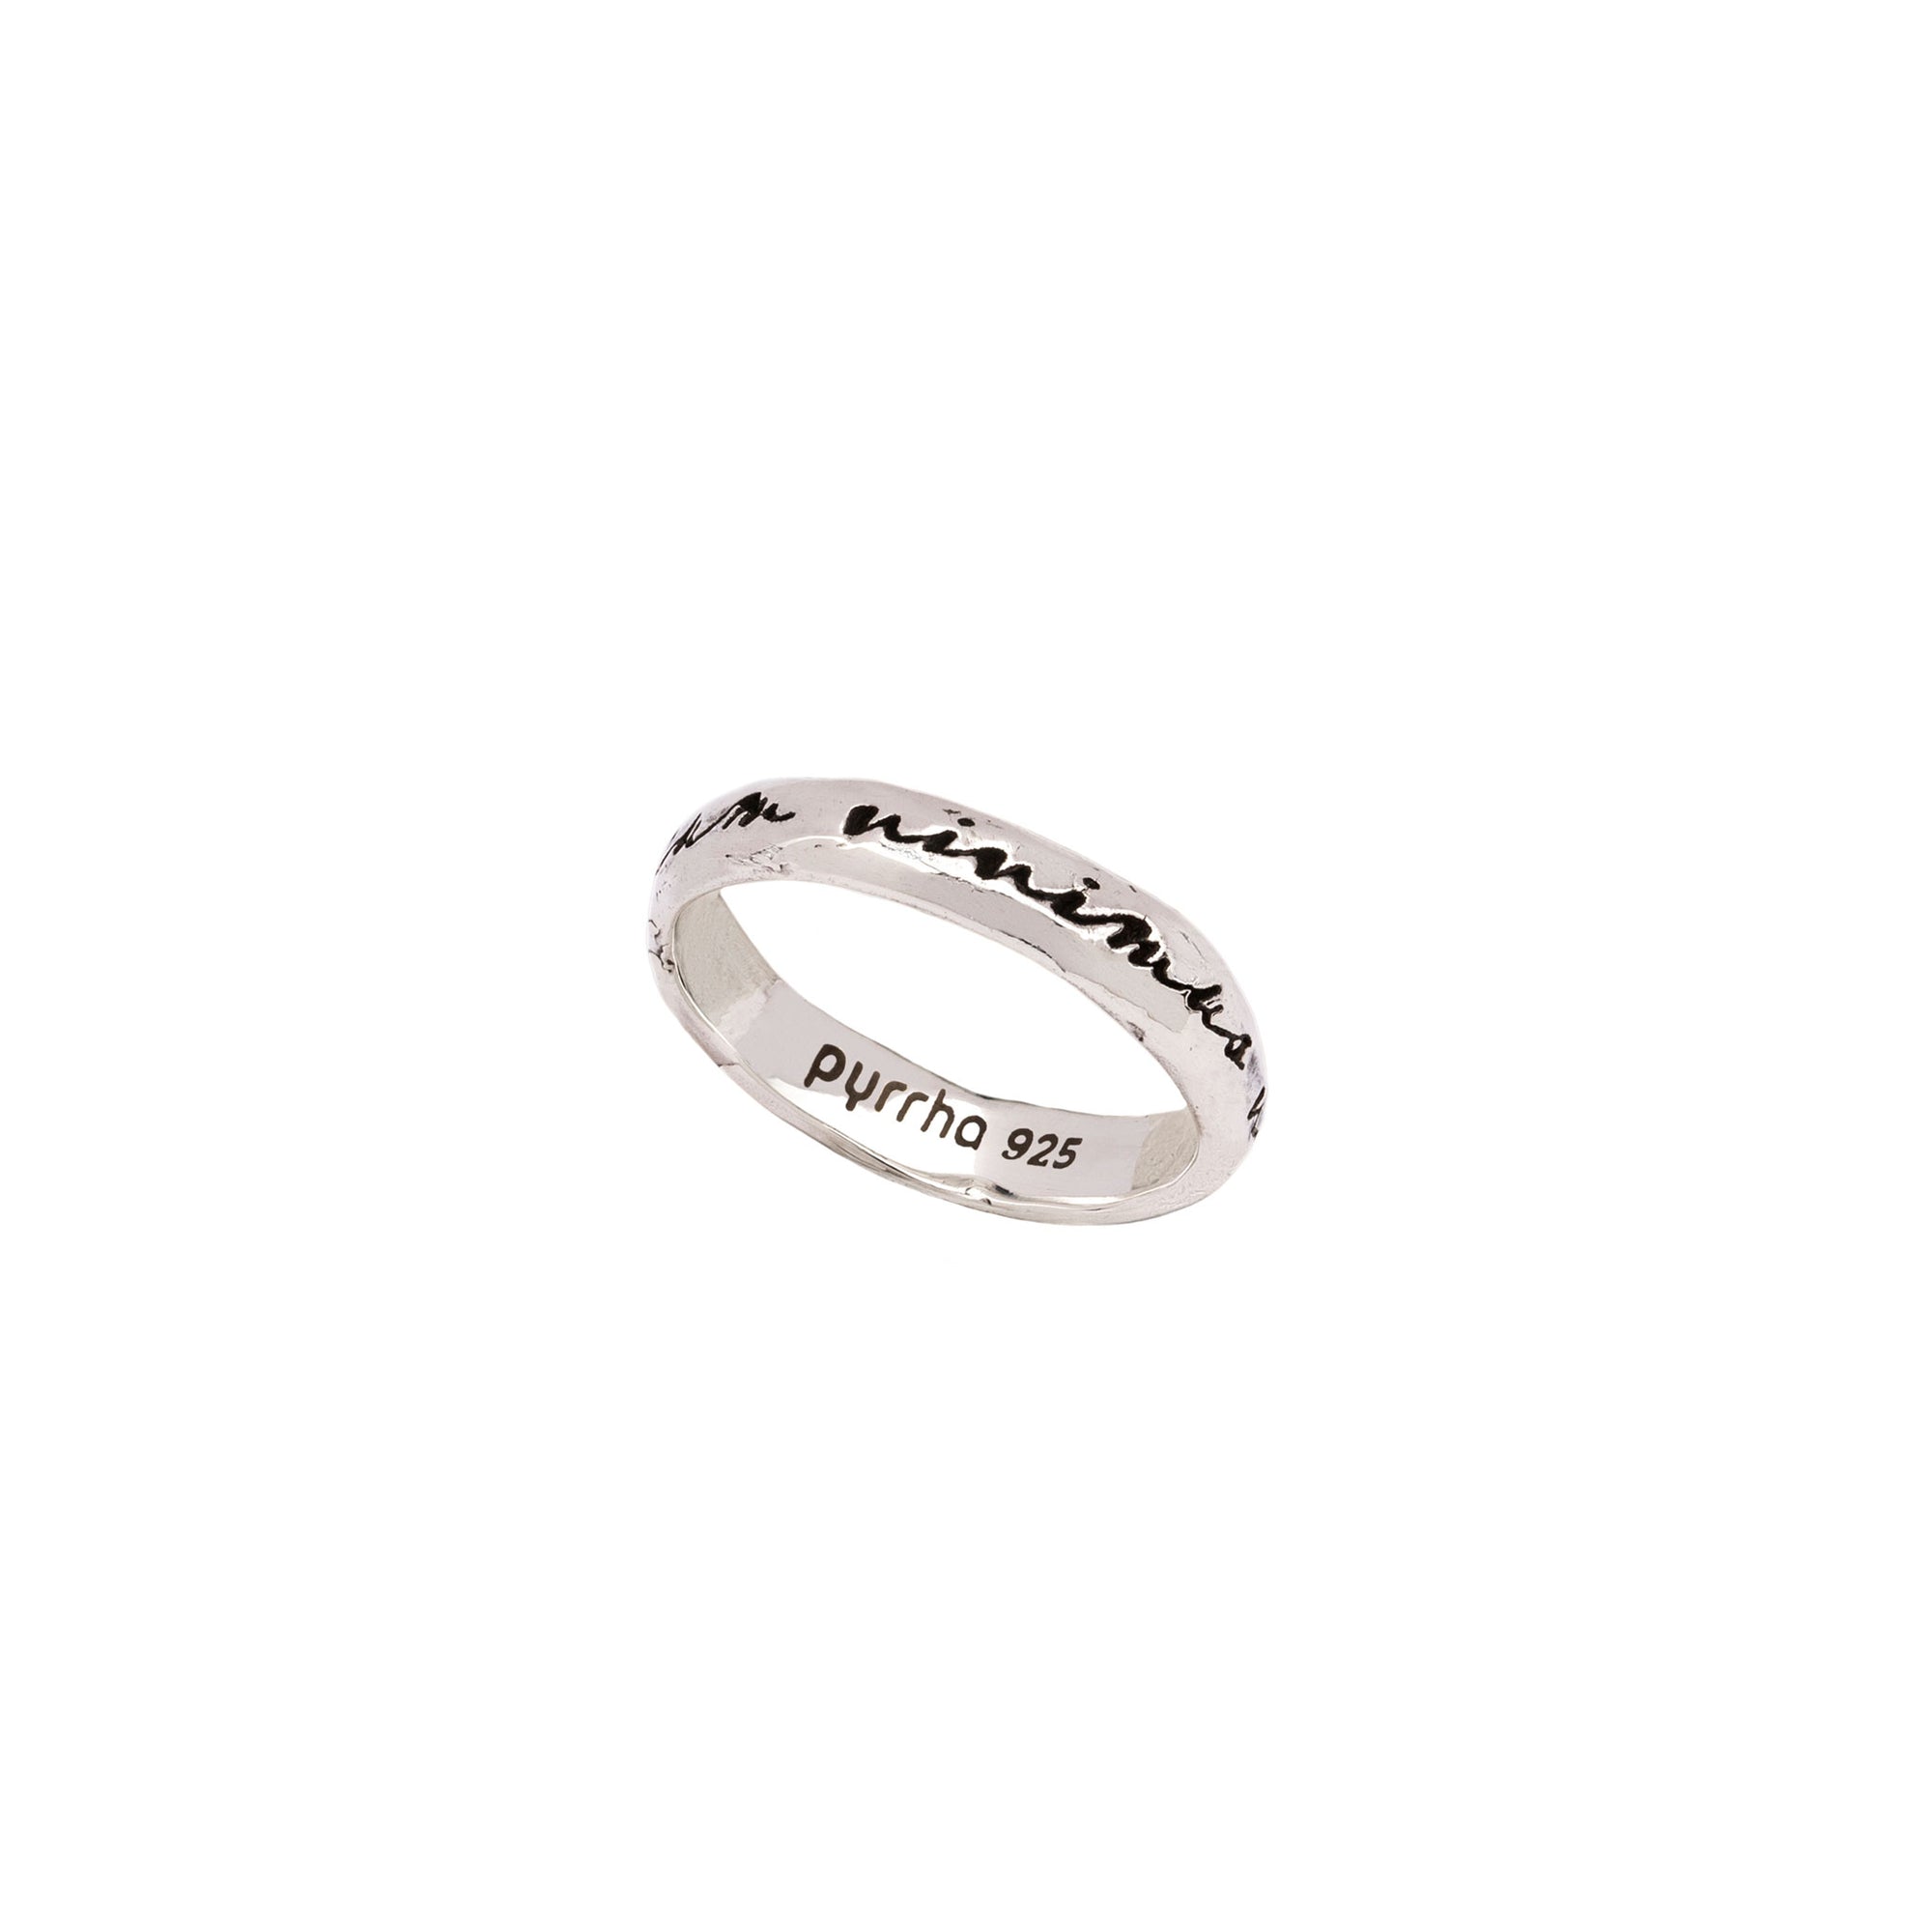 An silver band ring engraved with latin meaning while we live let us live